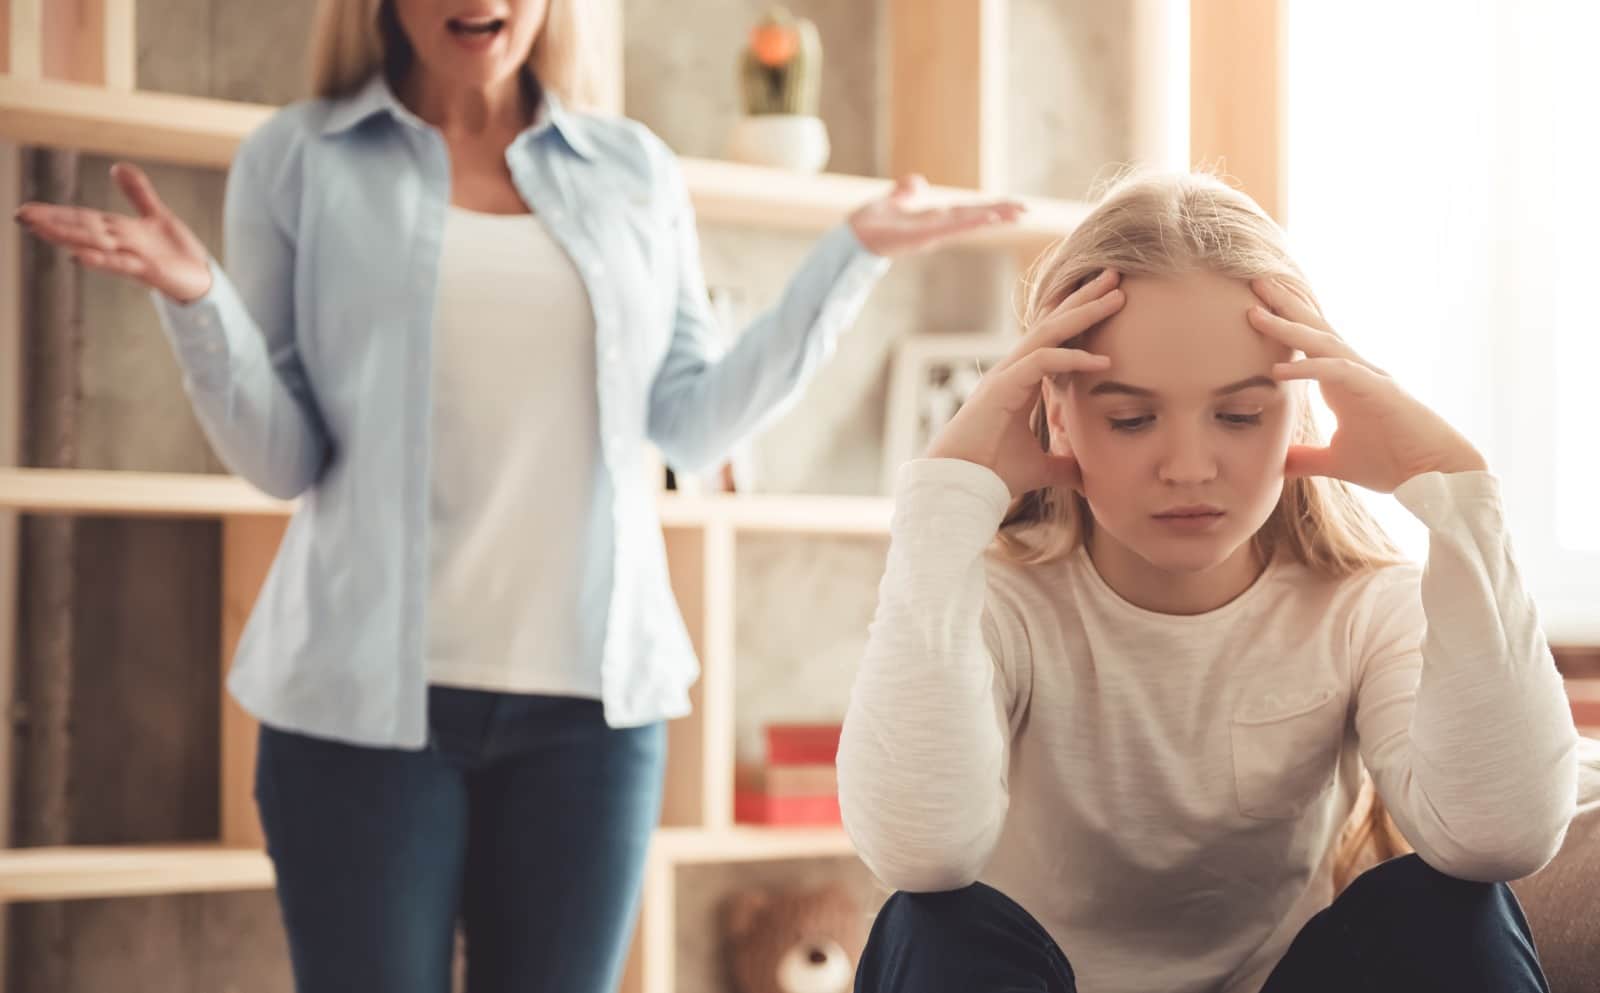 Image Credit: Shutterstock / VGstockstudio <p><span>Invalidating your child’s feelings of discontent might be preventing them from expressing their needs instead of fostering gratitude.</span></p>